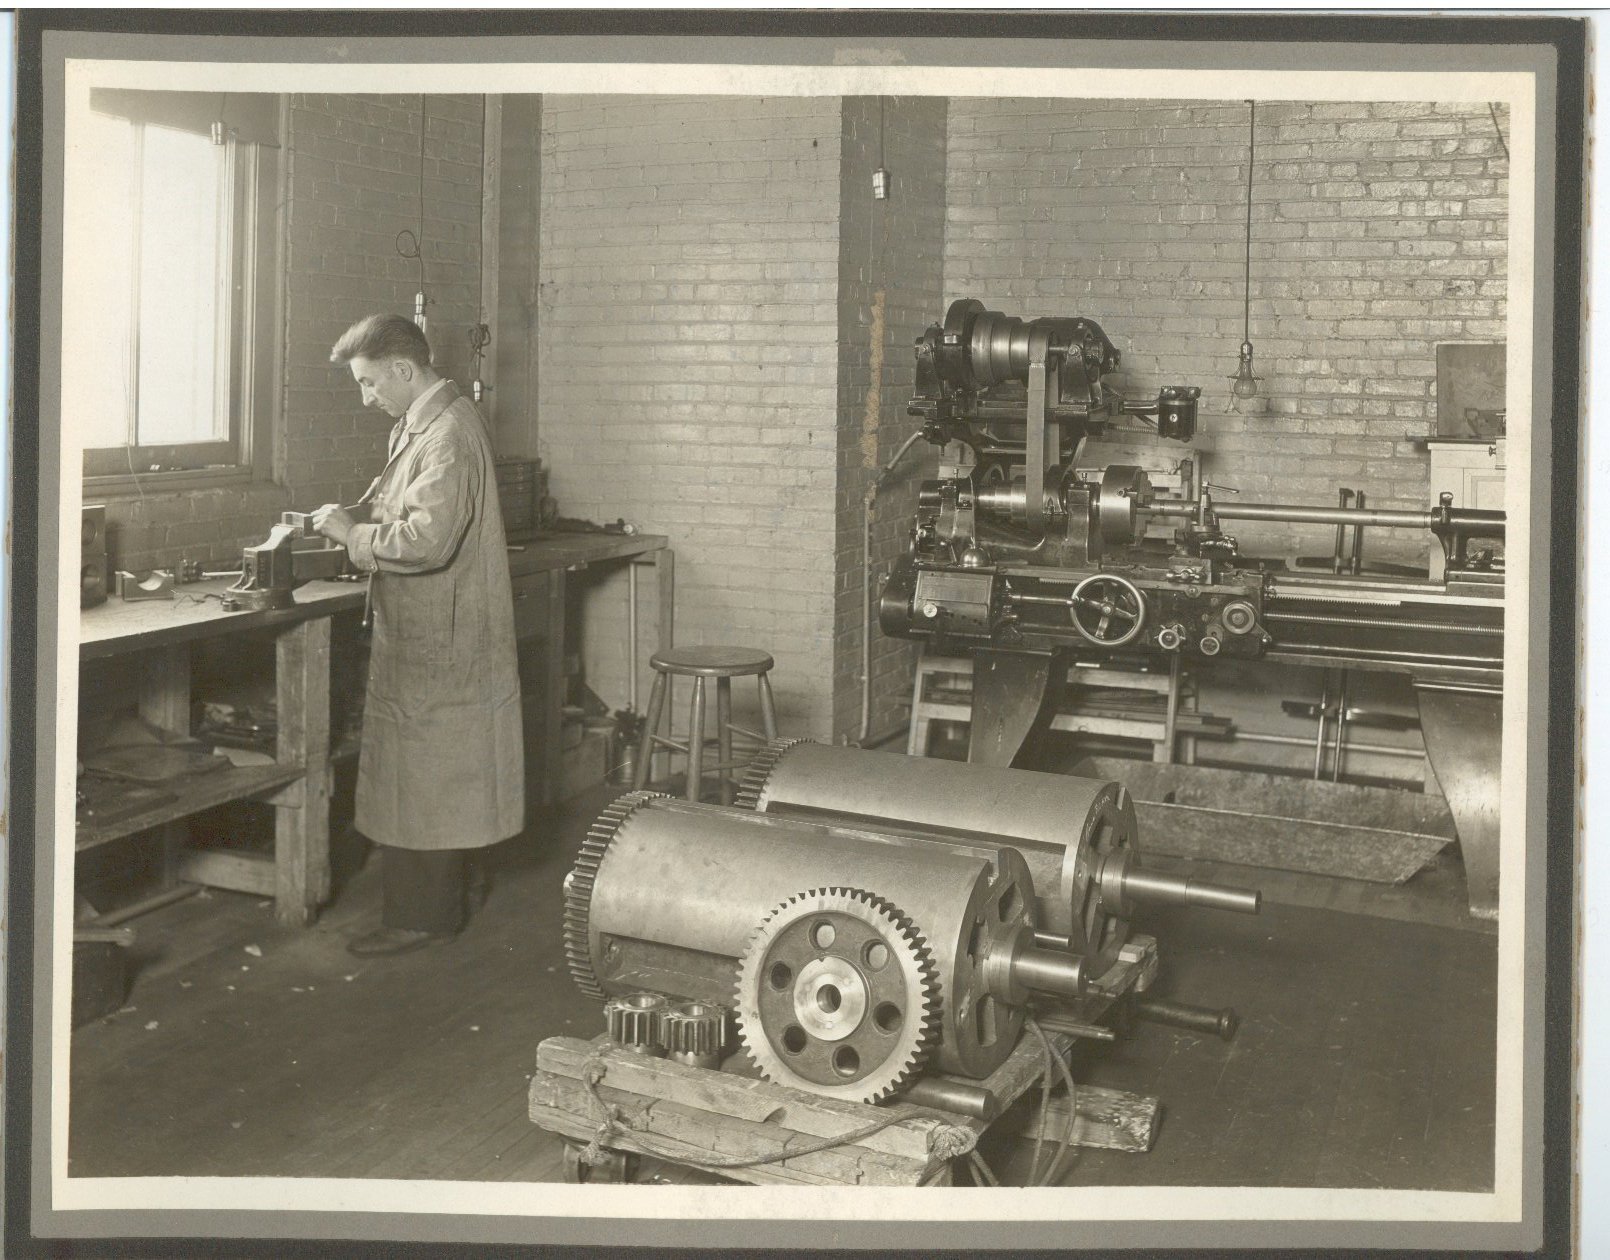 Hall of Fame space in 1931, when it housed the APH machine shop.